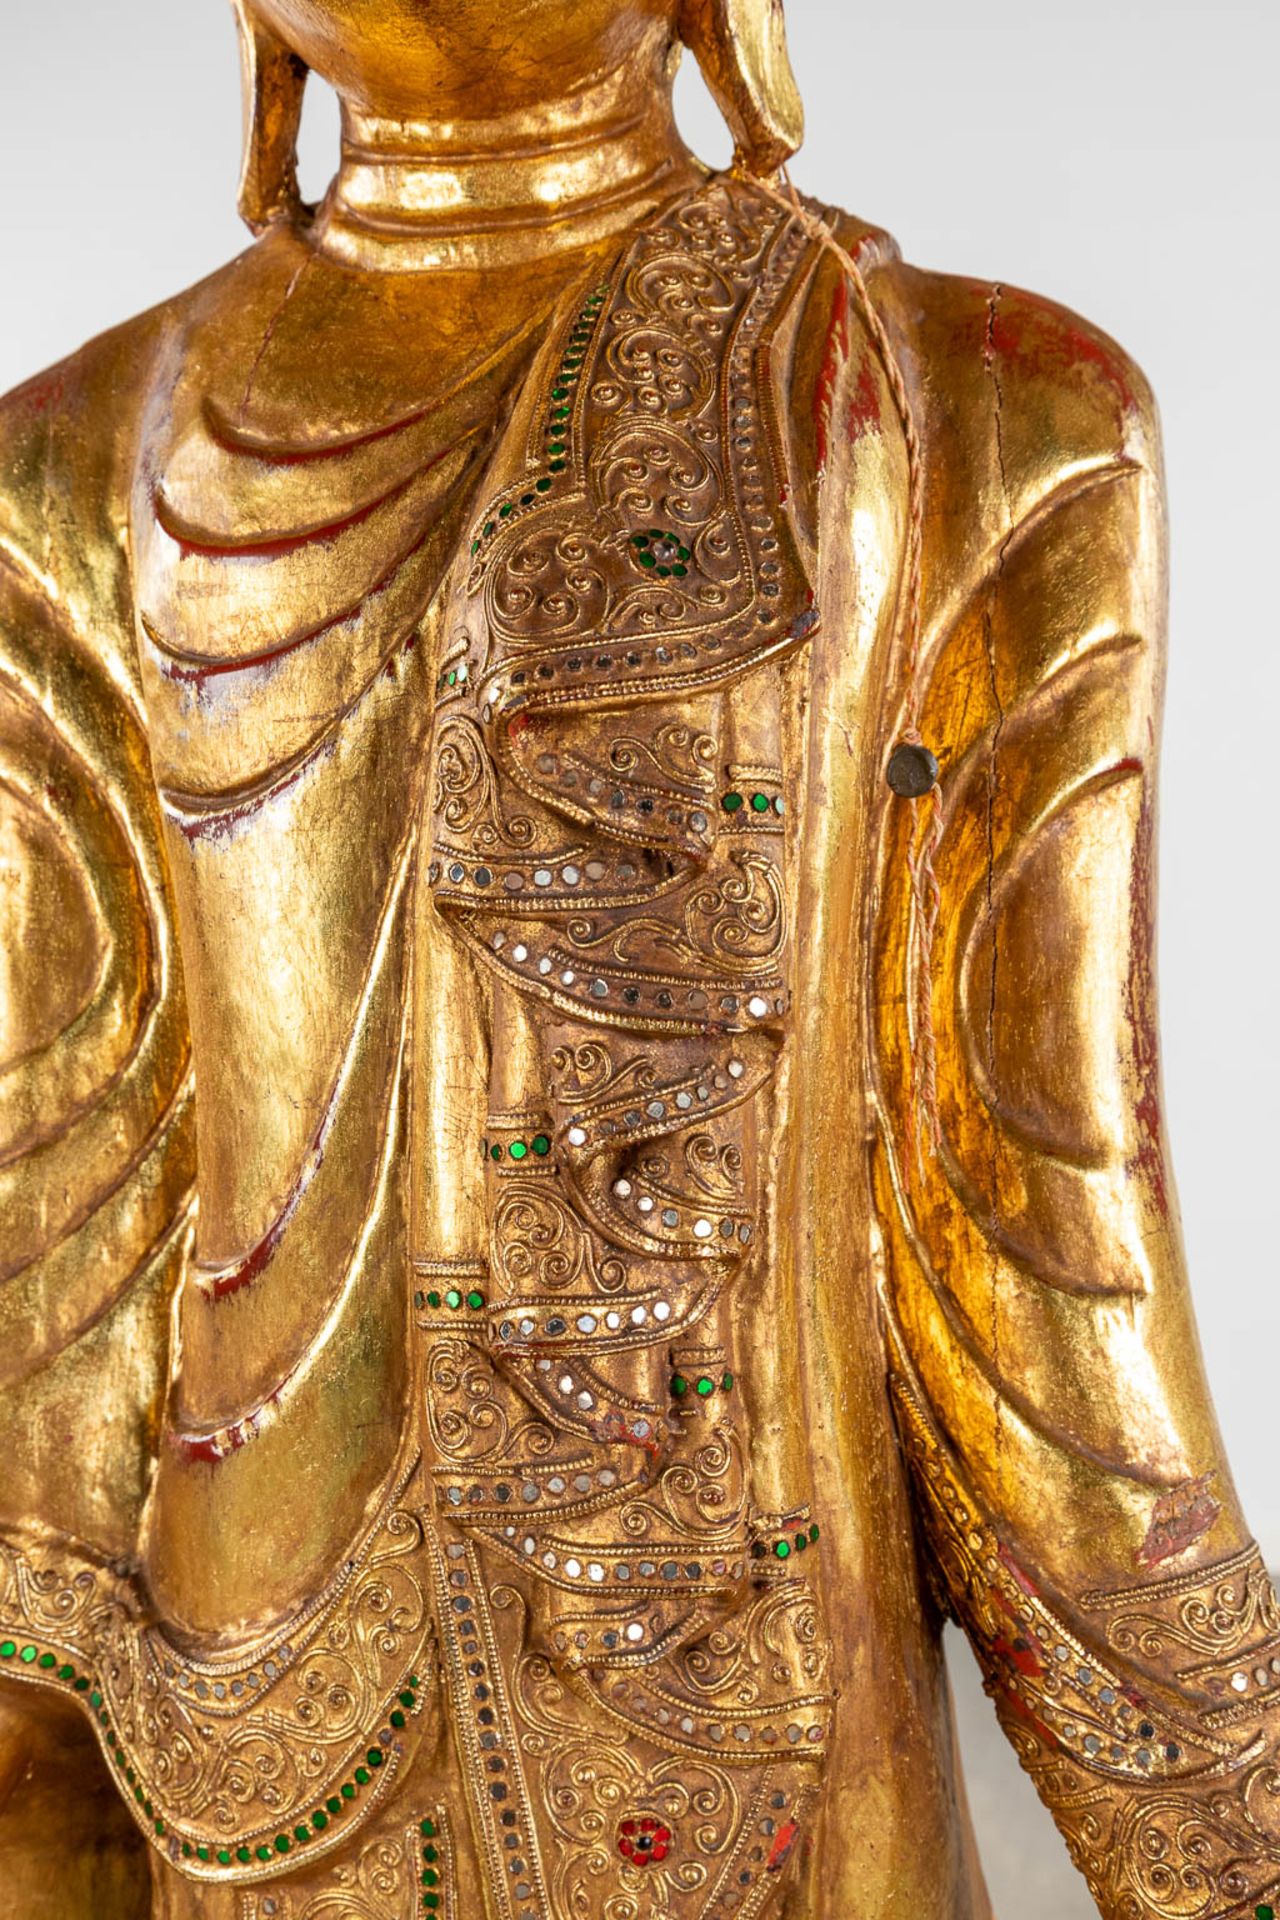 A large and decorative wood sculptured figurine of Buddha, 20th C. (D:30 x W:67 x H:164 cm) - Image 9 of 15